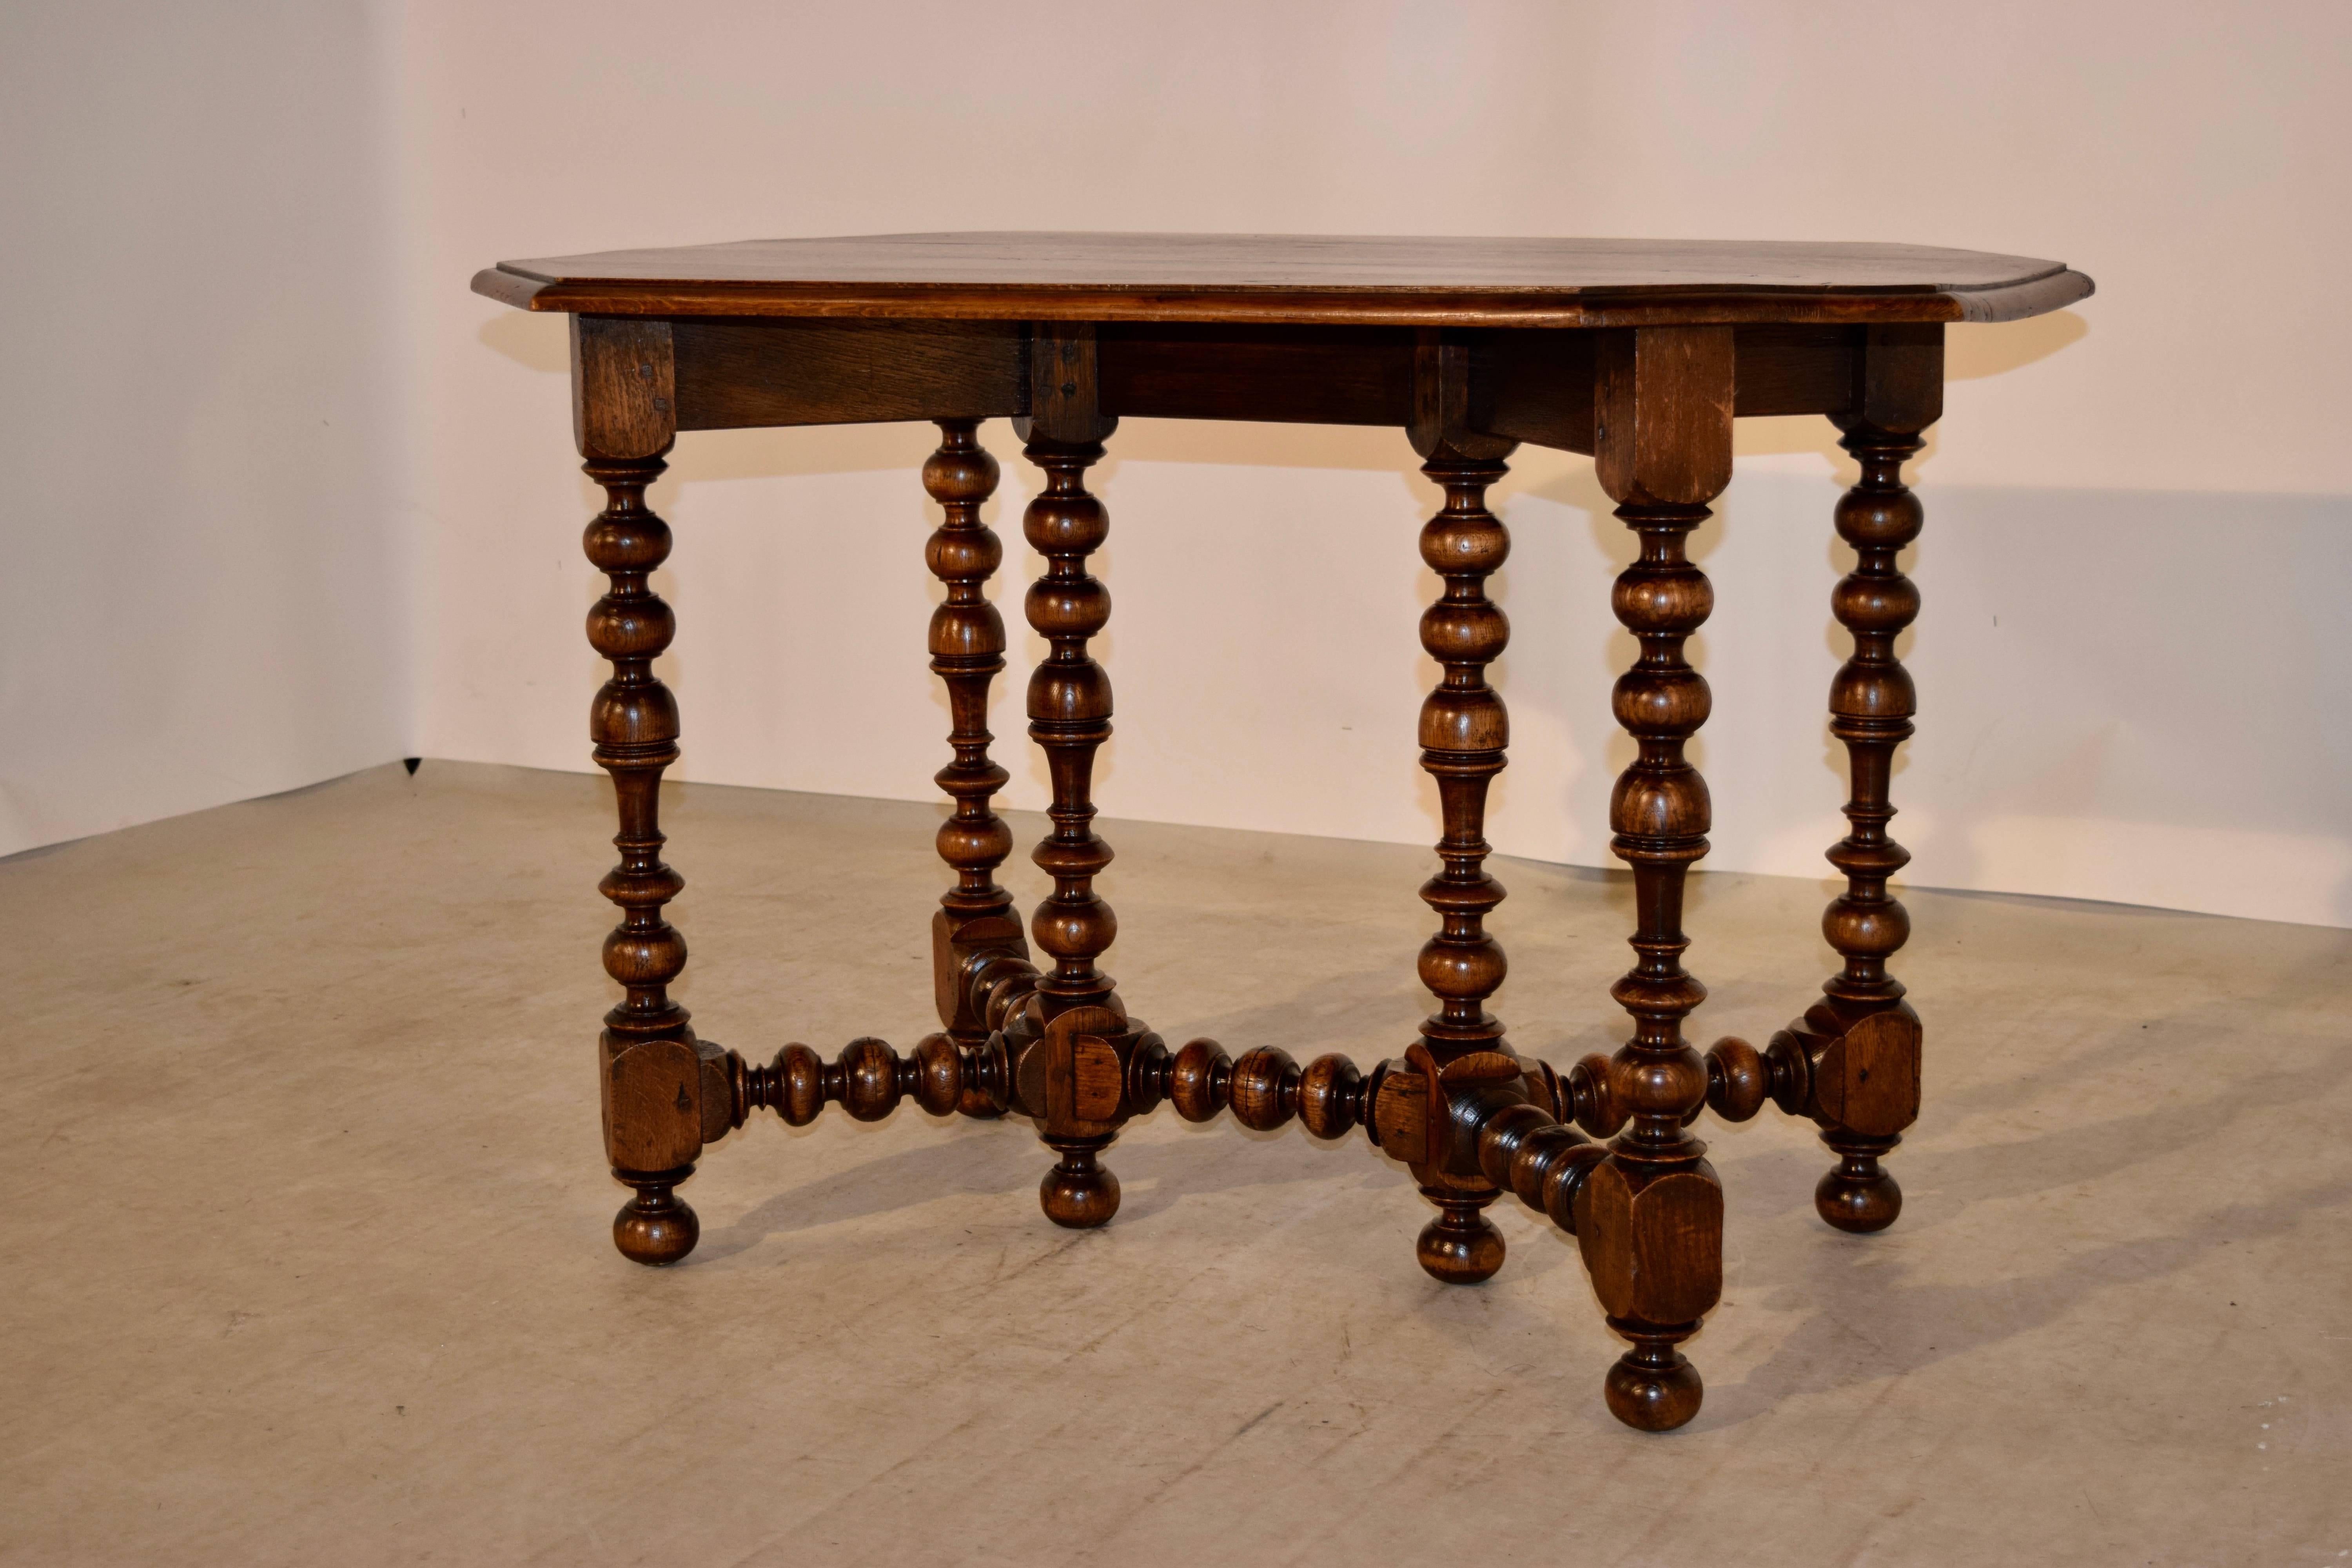 19th century oak table from France. The top is a large octagonal shape with a beveled edge. The apron is simple and follows along with the leg pattern. There are two legs supporting each side of the table, with two central legs. All joined by hand